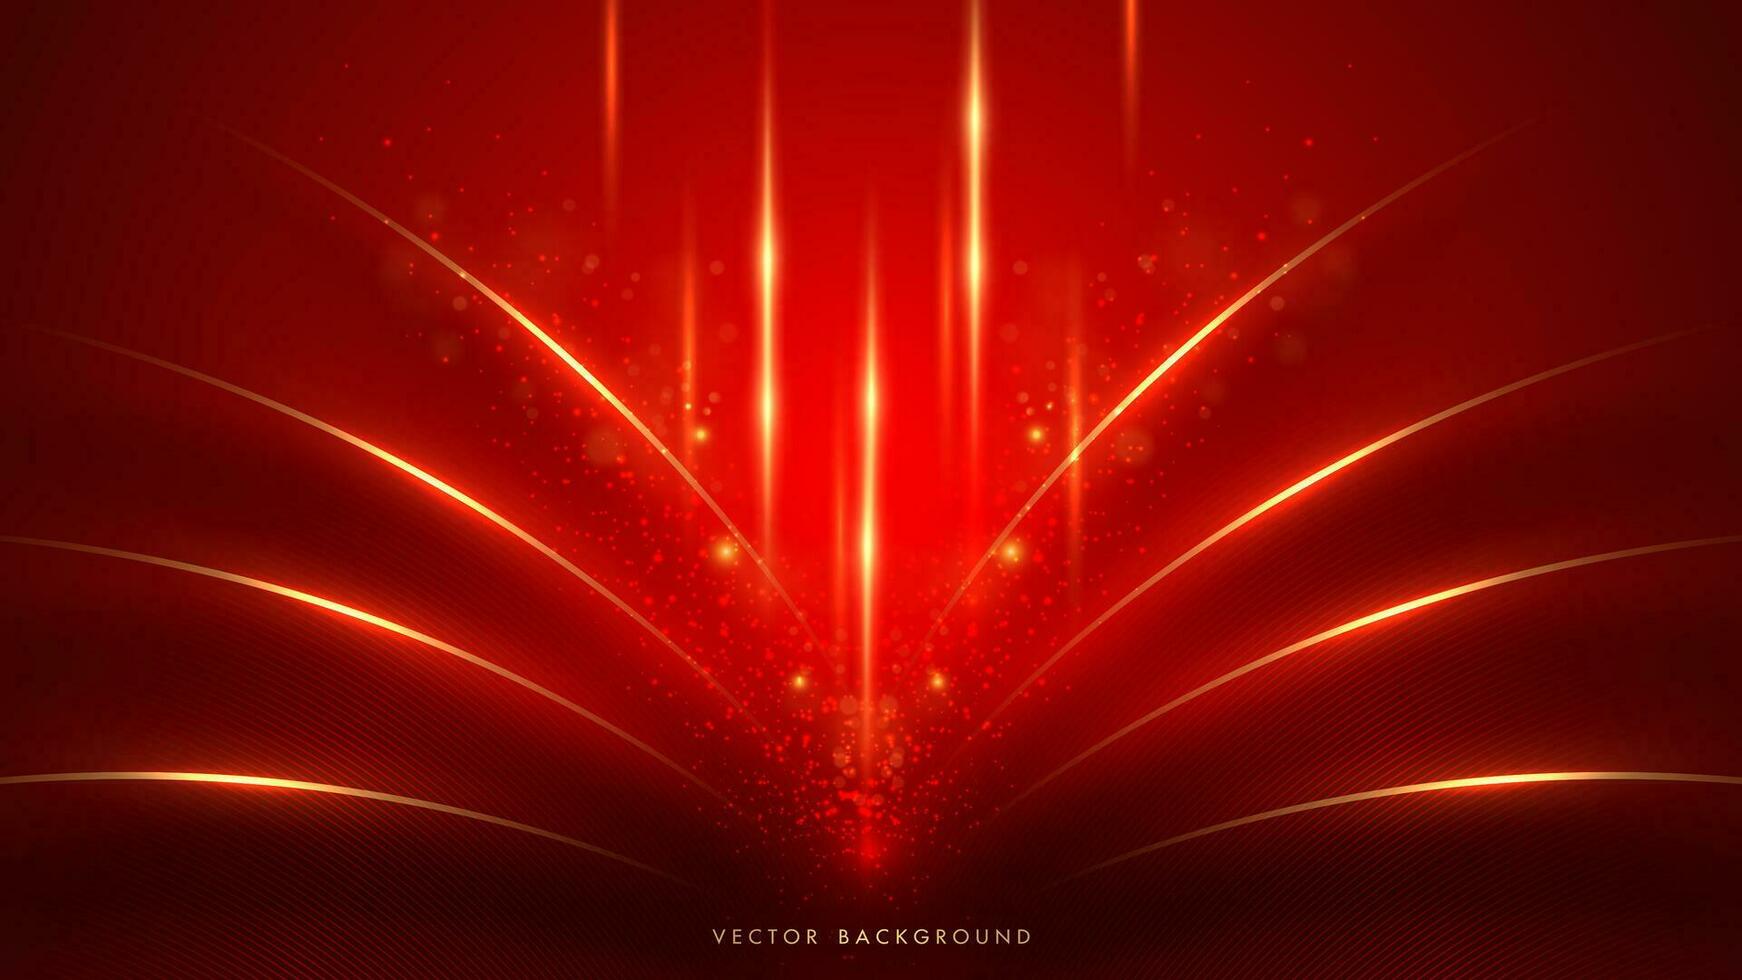 Luxury red background with golden lines, sparkle glow, glitter light and beam effect decoration vector